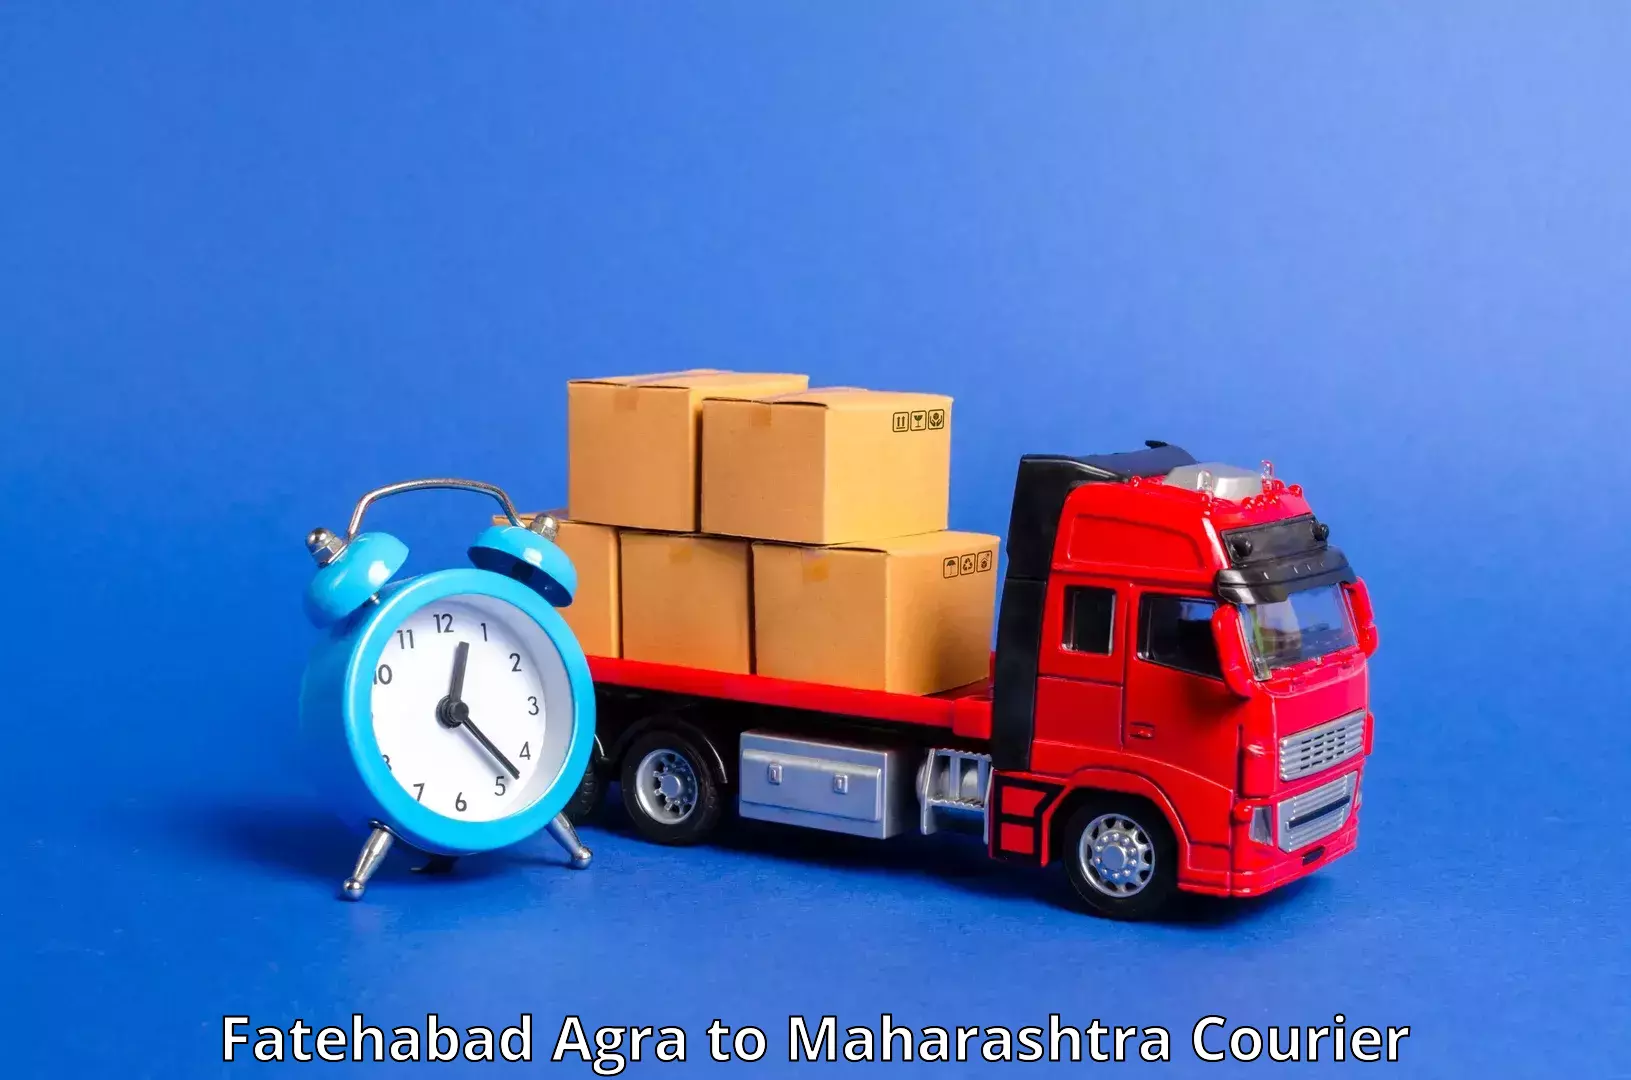 Courier service booking Fatehabad Agra to Georai